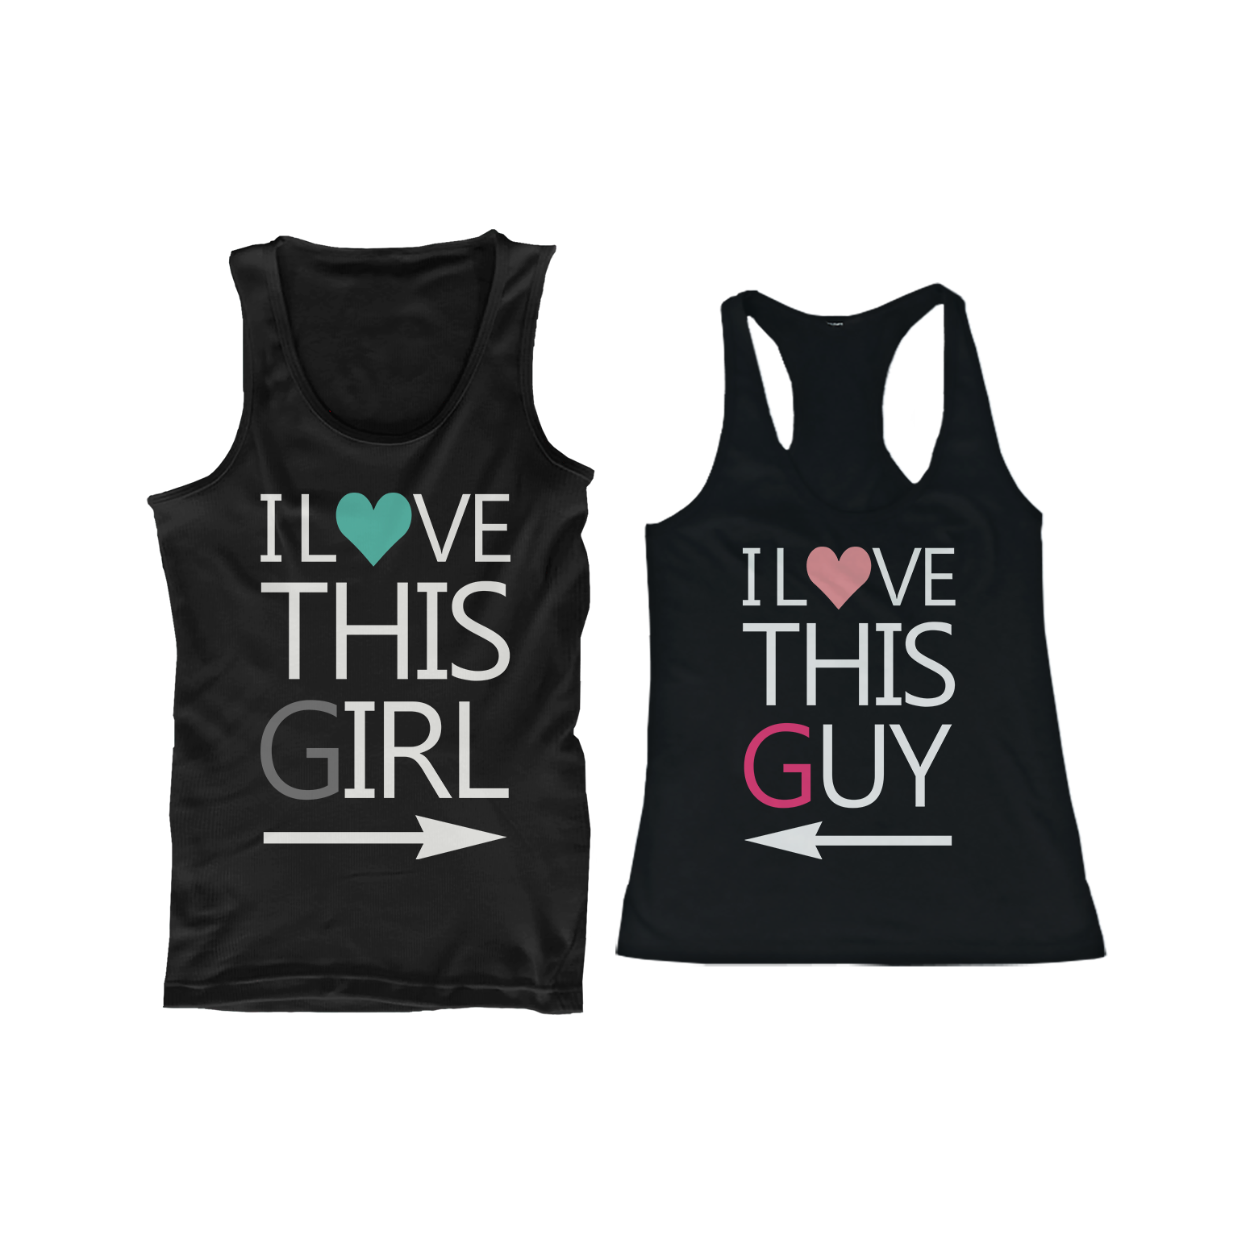 I Love This Girl And I Love This Guy Couple Shirts